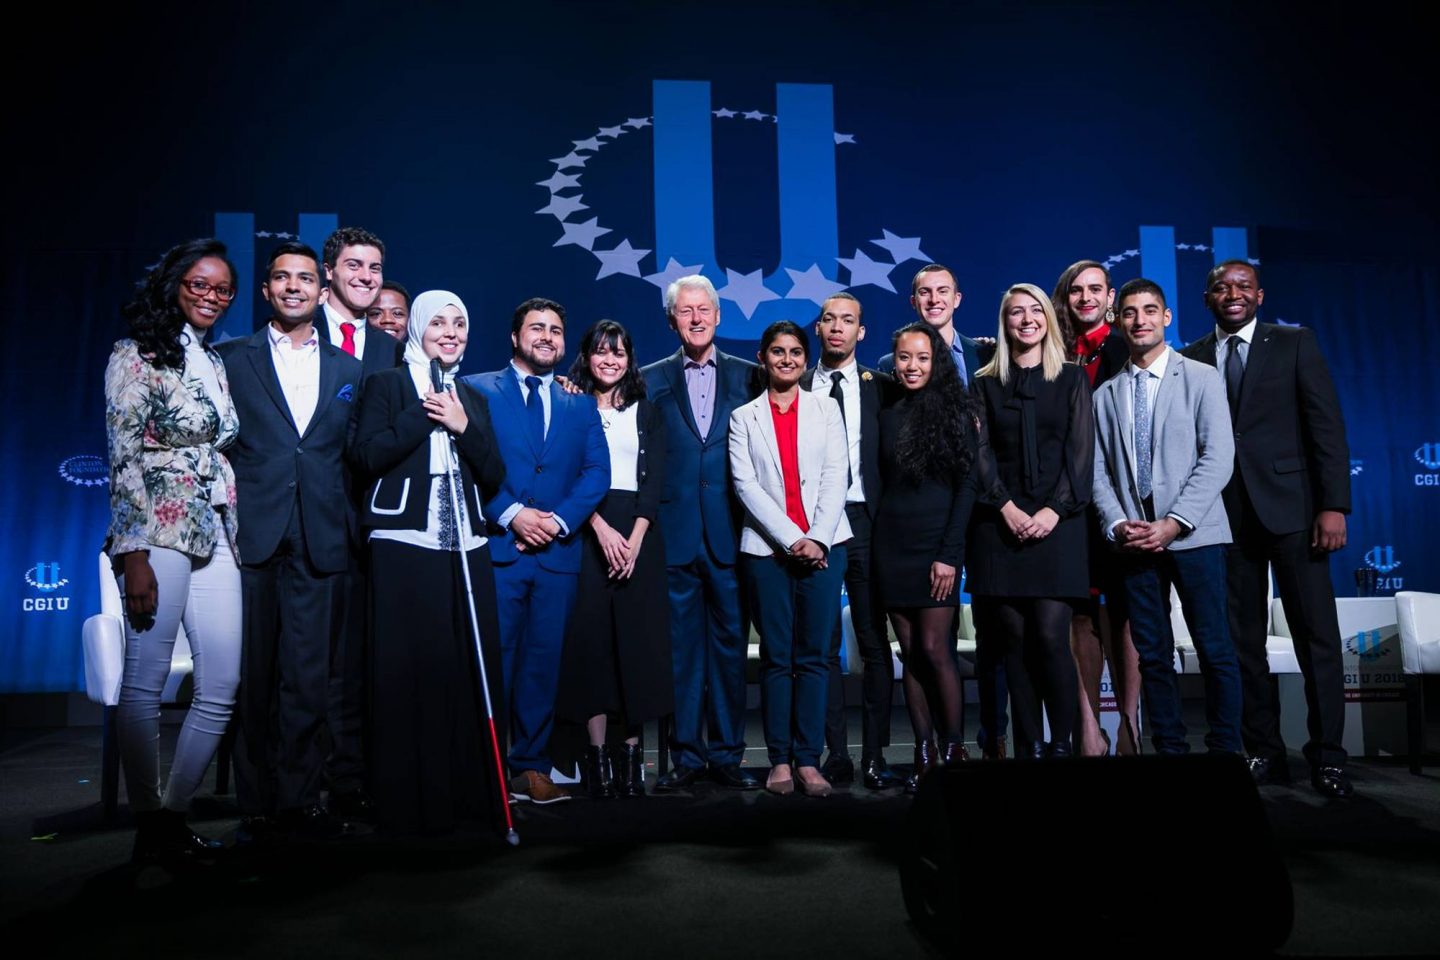 President Clinton stands onstage with a large group of individuals at a CGI University event